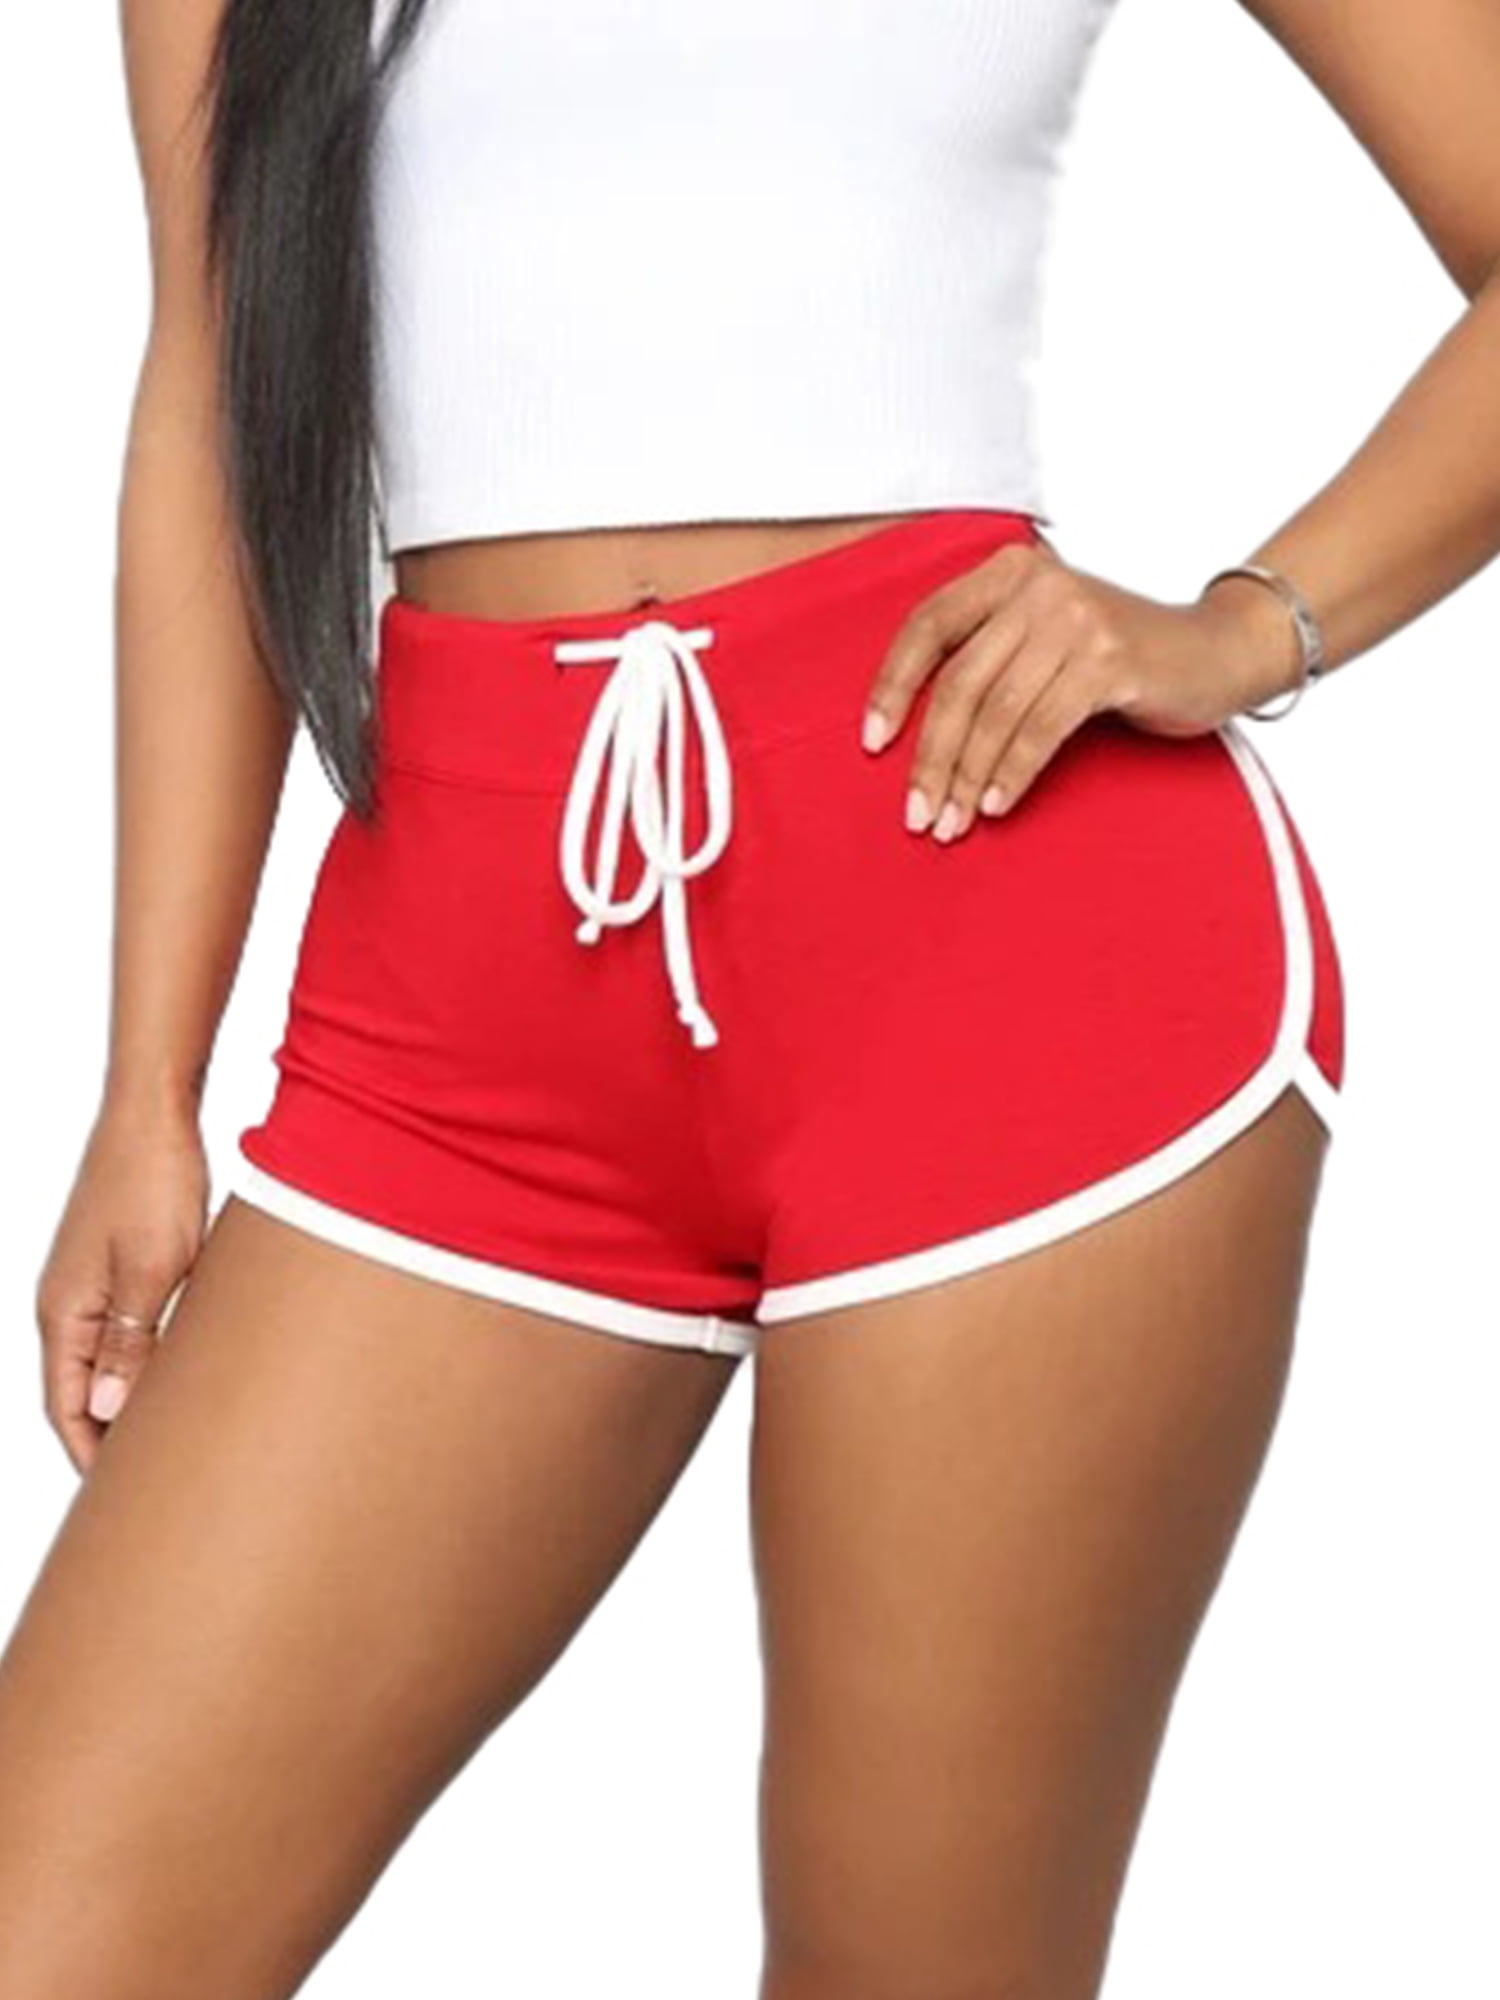 Women 4 Cotton Blend Shorts Comfy Solid Color Workout Shorts Elastic Waist Running Shorts Hot Pants with Pockets Sports & Outdoors